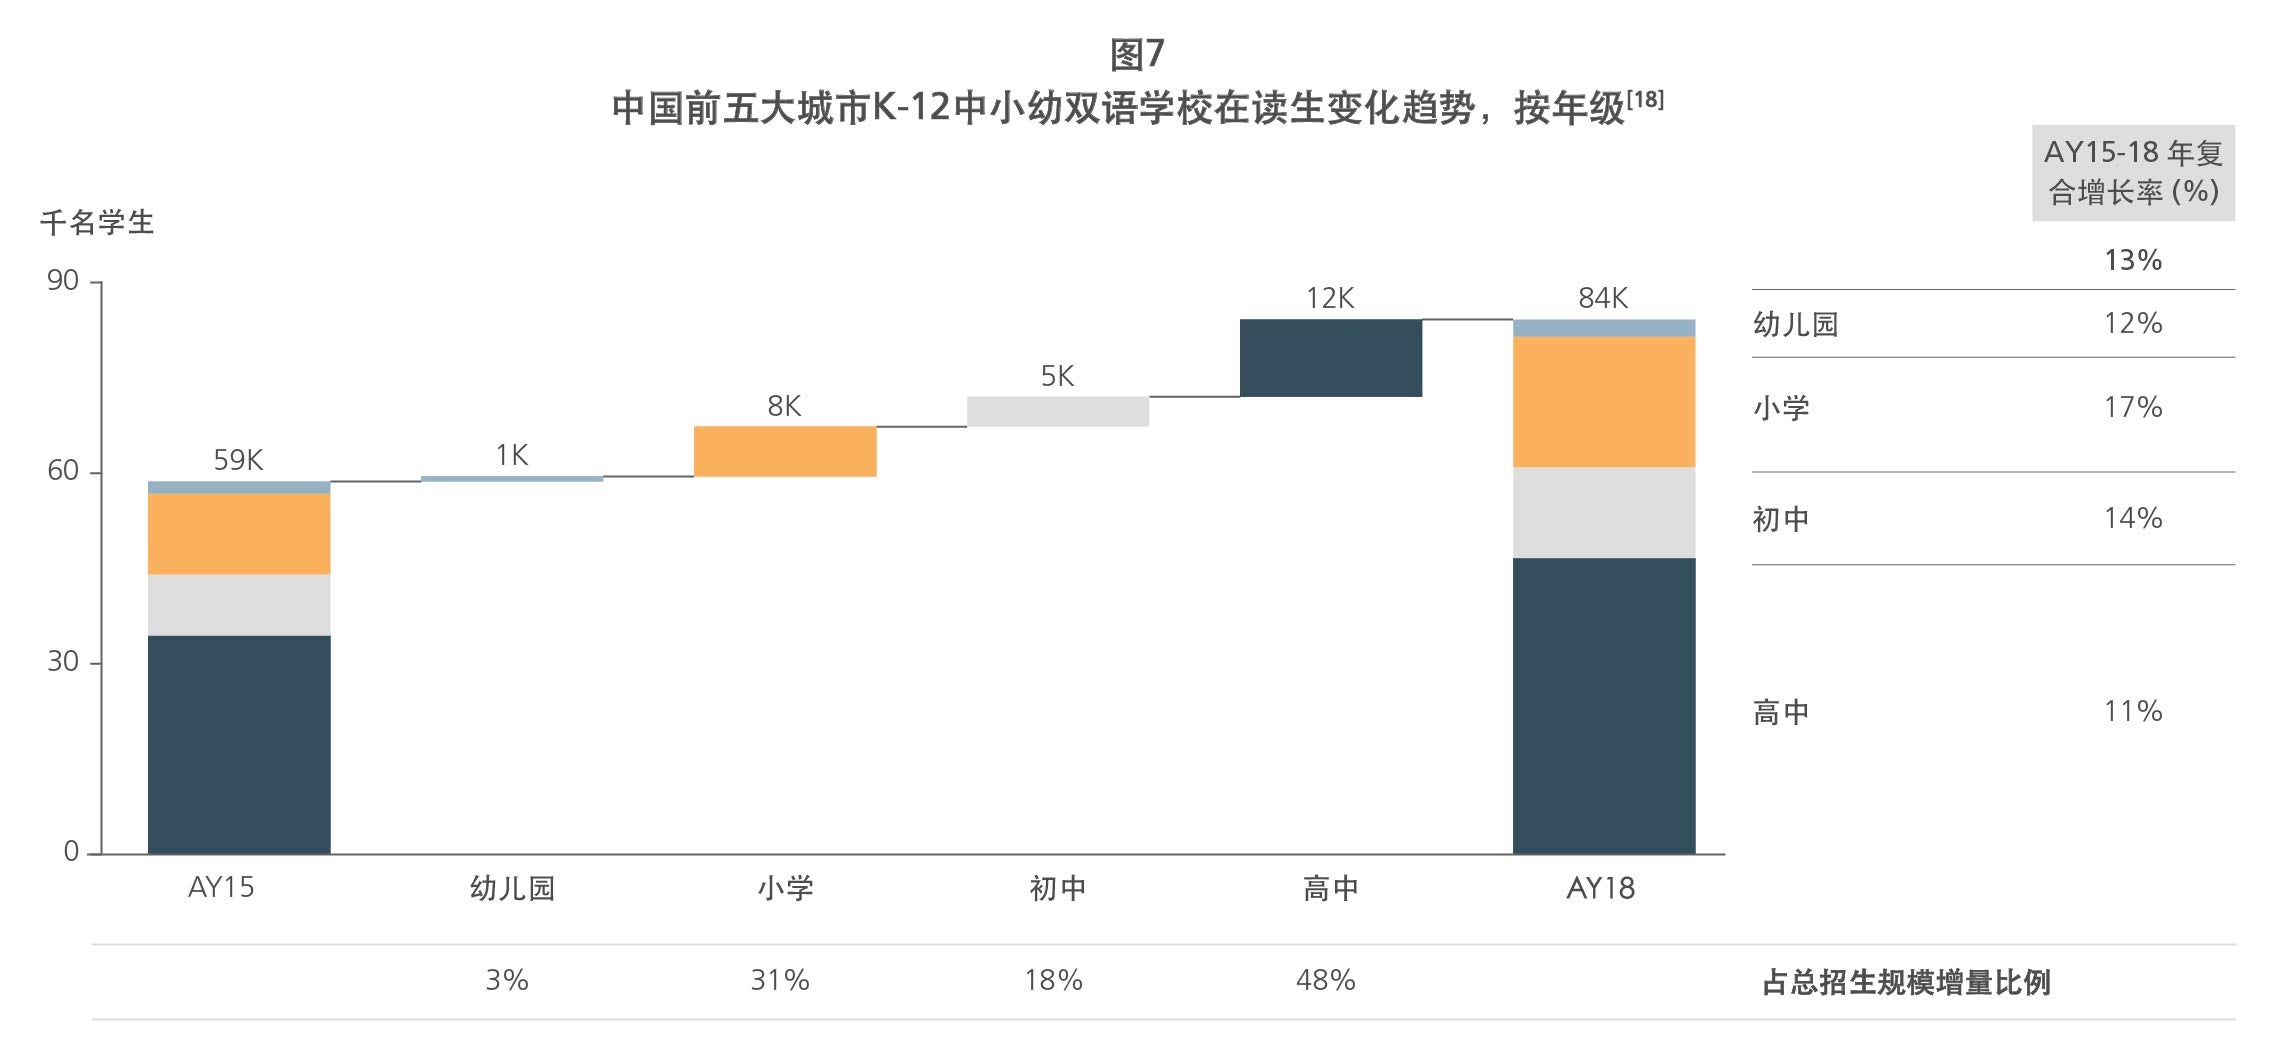 Change in bilingual K-12 enrollment by grade in top Chinese cities